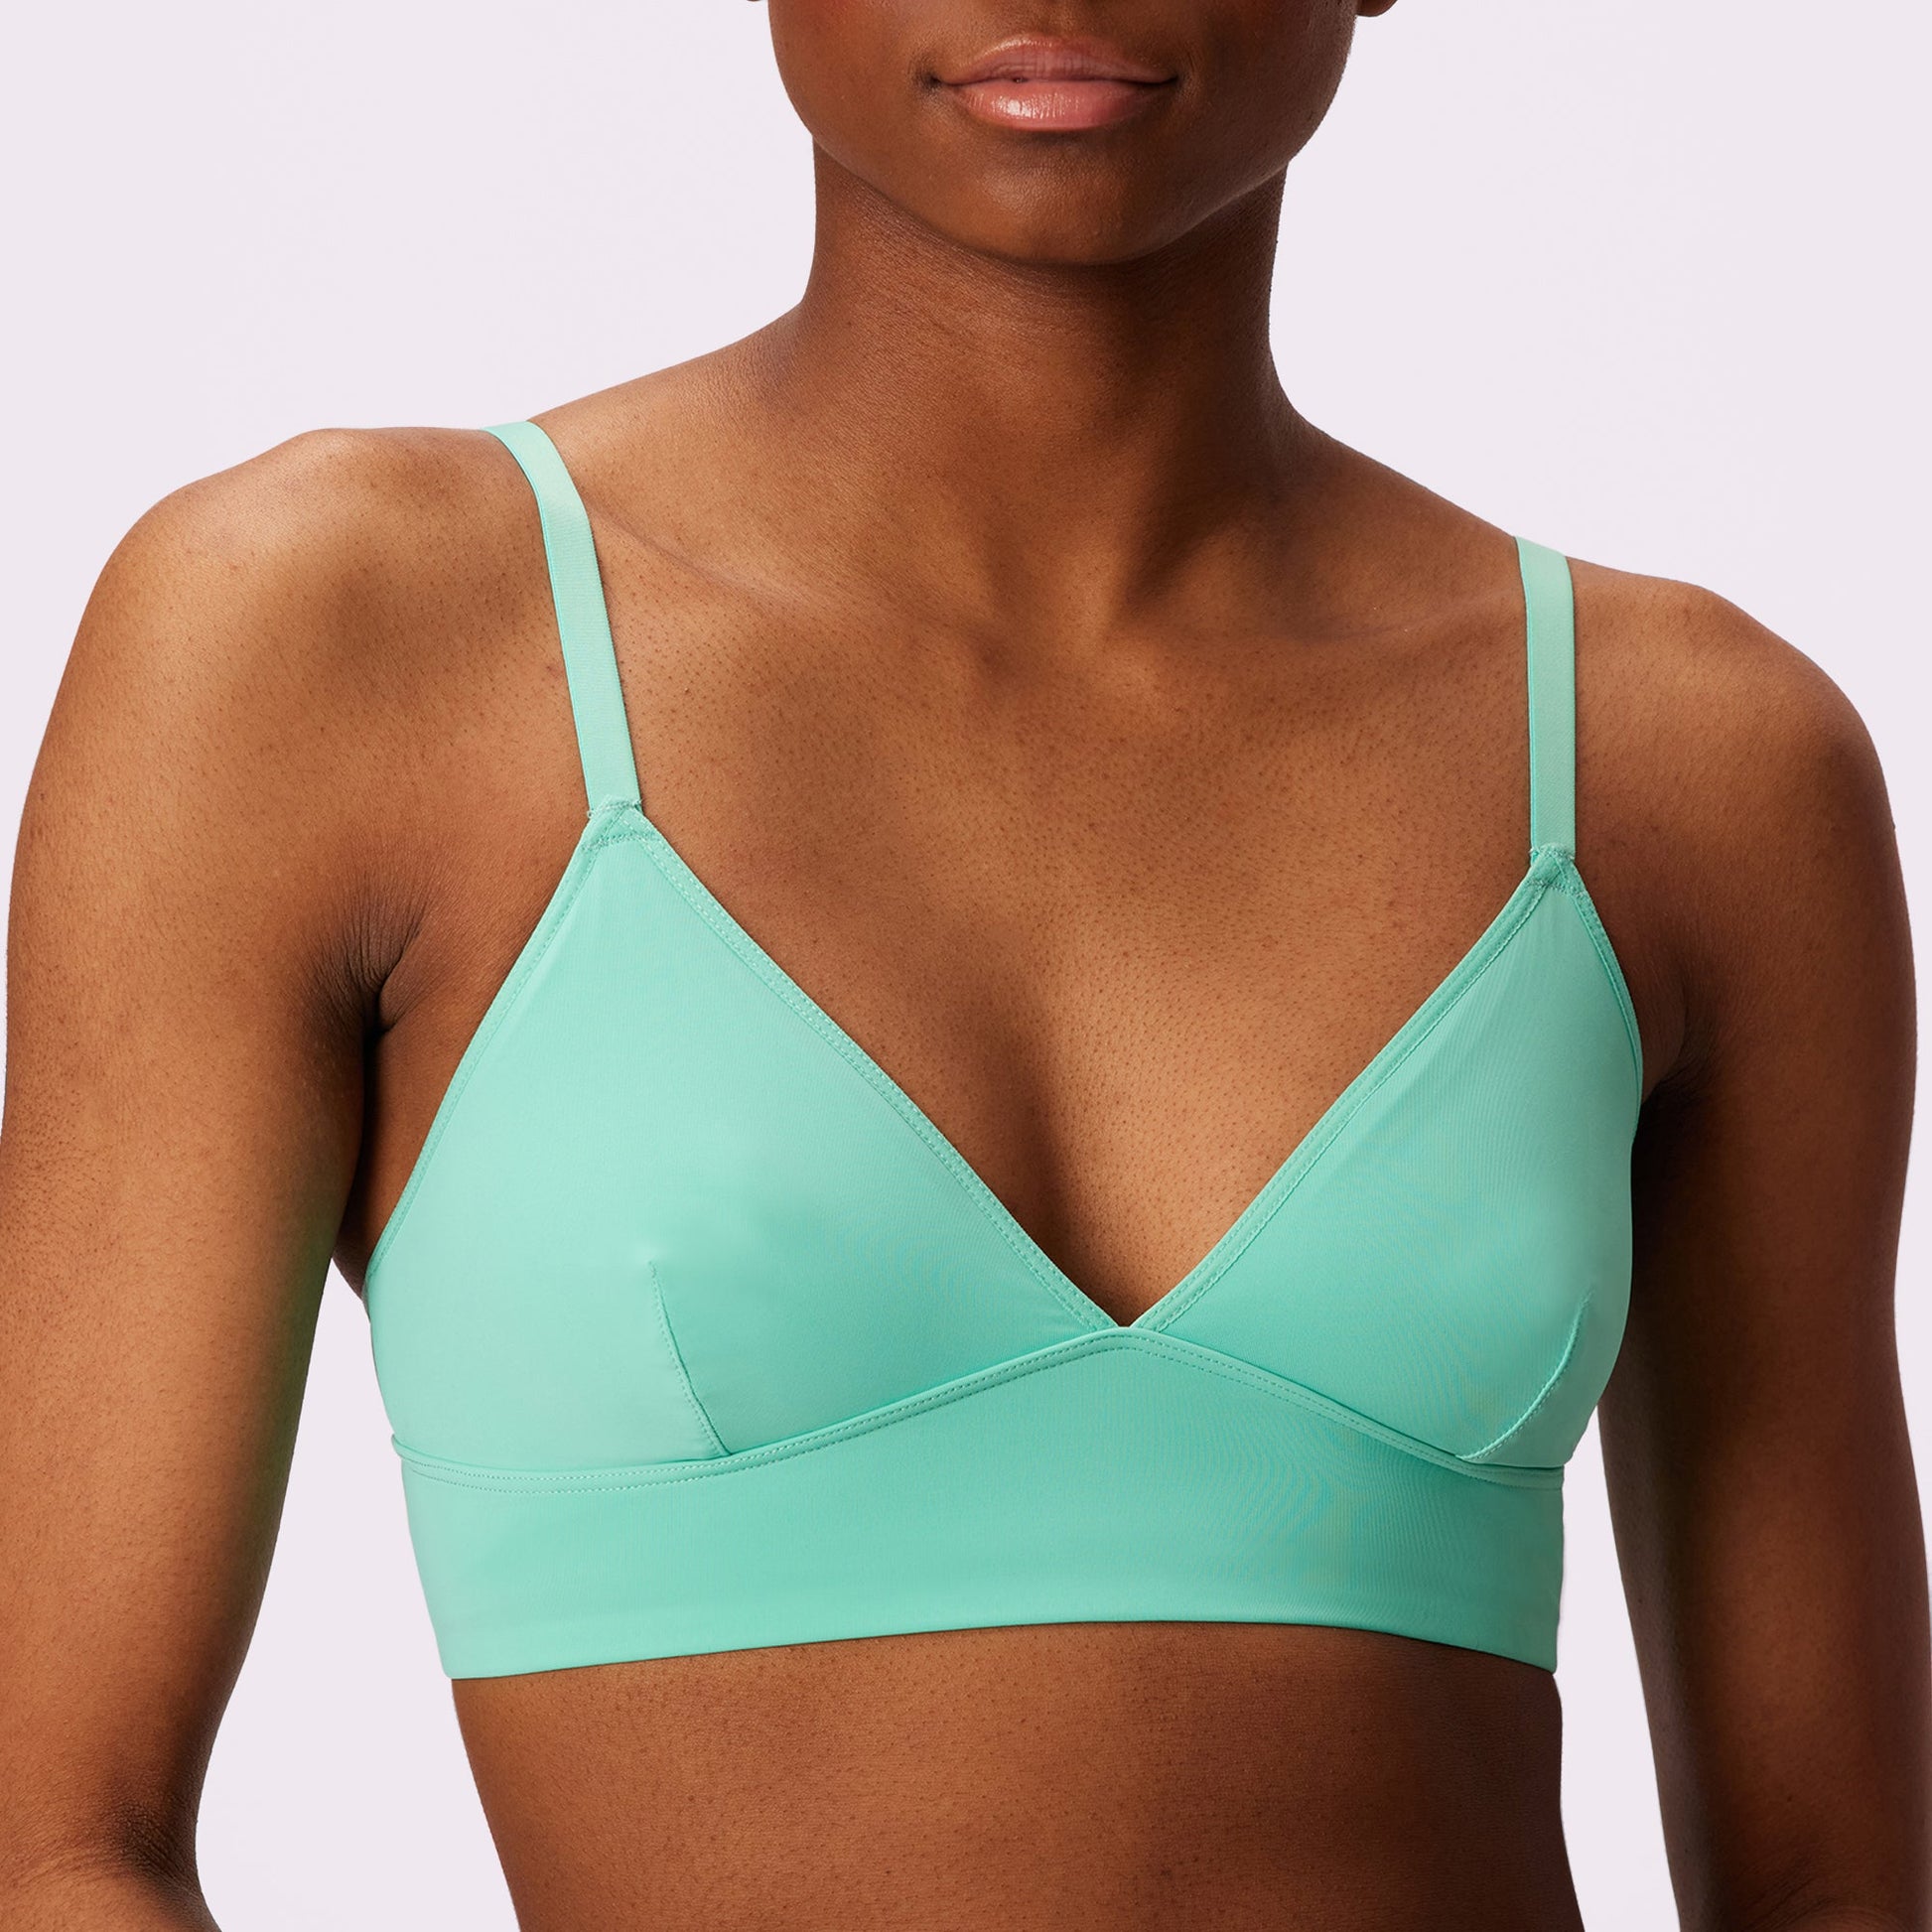 Buy Le Inegale Pearl Bralette by Designer NOTRE AME for Women online at